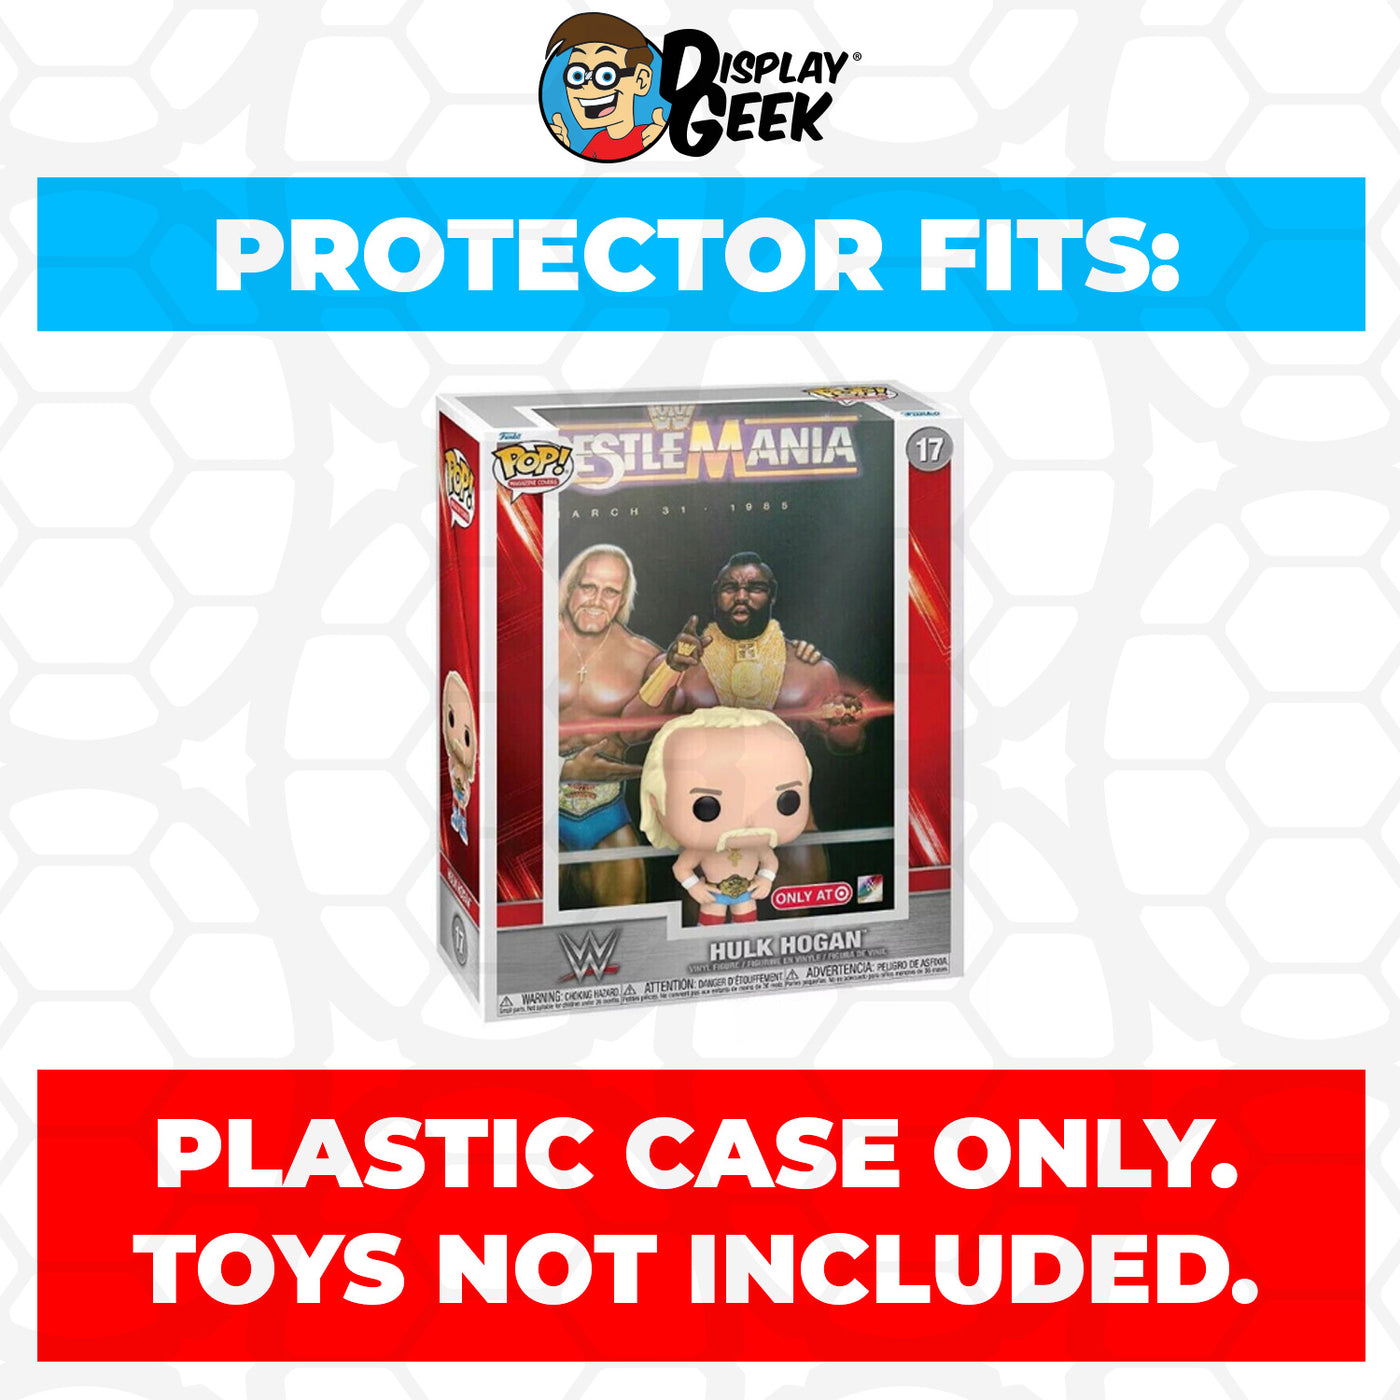 Pop Protector for WrestleMania Hulk Hogan #17 WWE Funko Pop Magazine Covers on The Protector Guide App by Display Geek